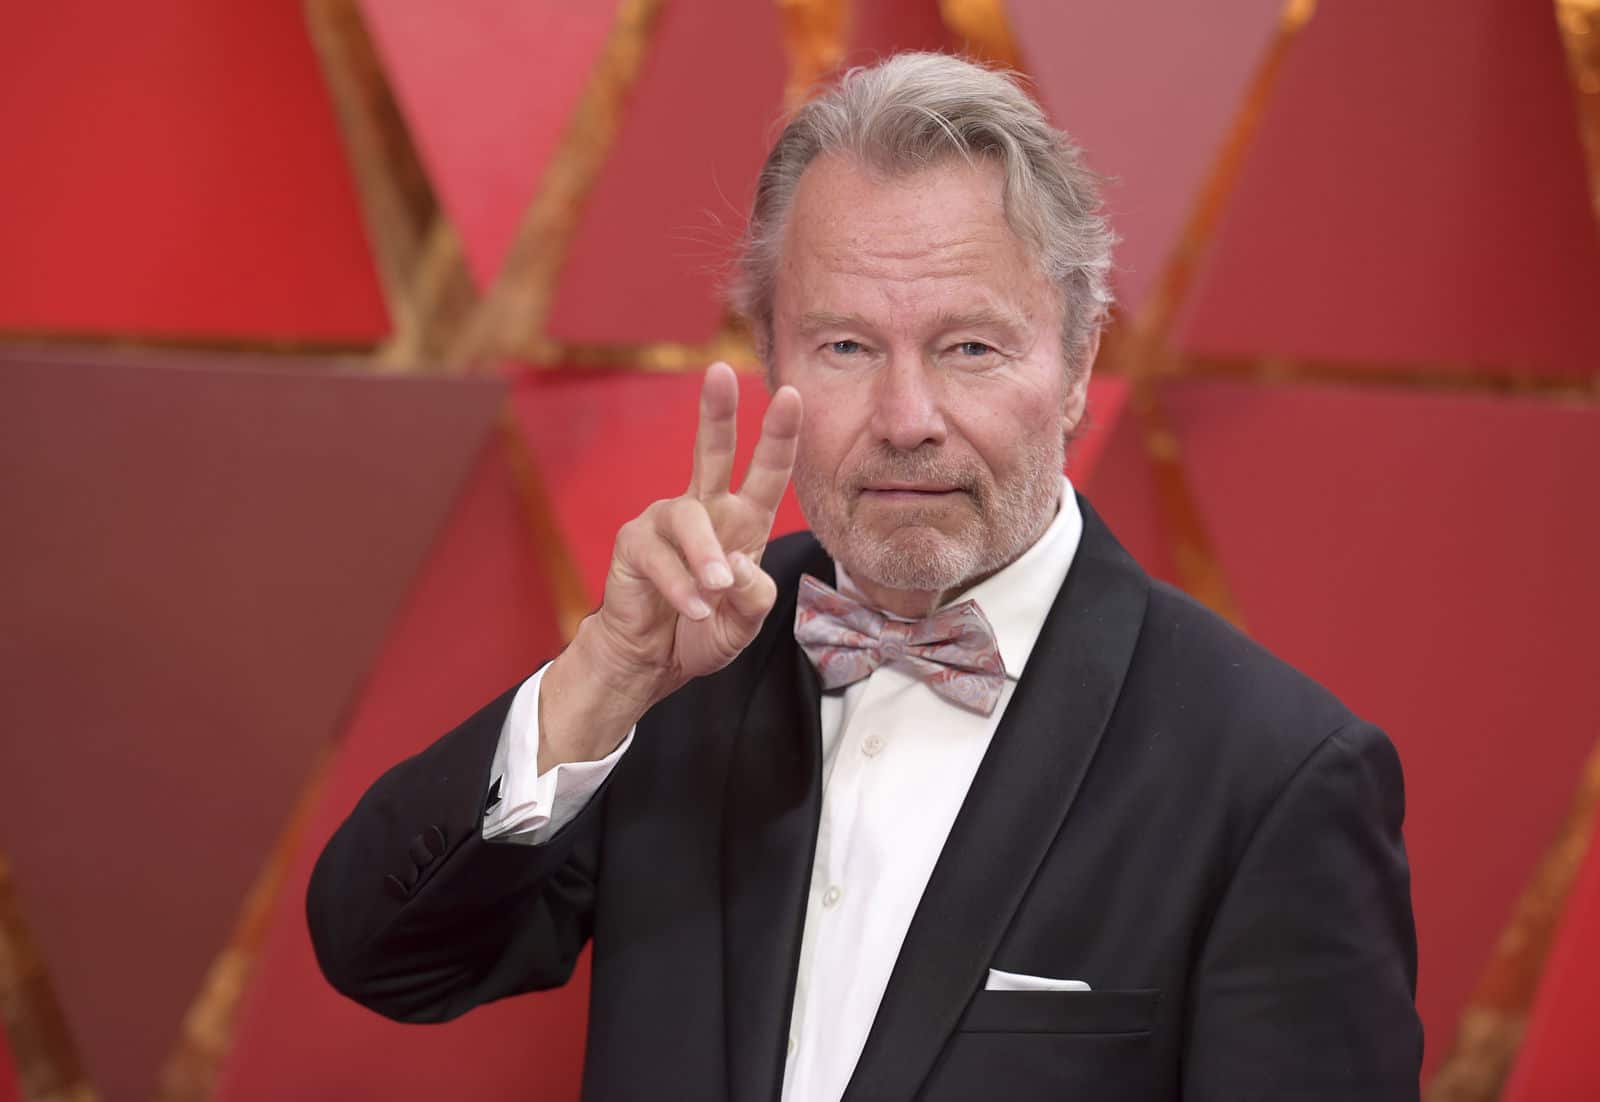 John Savage arrives at the Oscars on Sunday, March 4, 2018, at the Dolby Theatre in Los Angeles. (Photo by Richard Shotwell/Invision/AP)